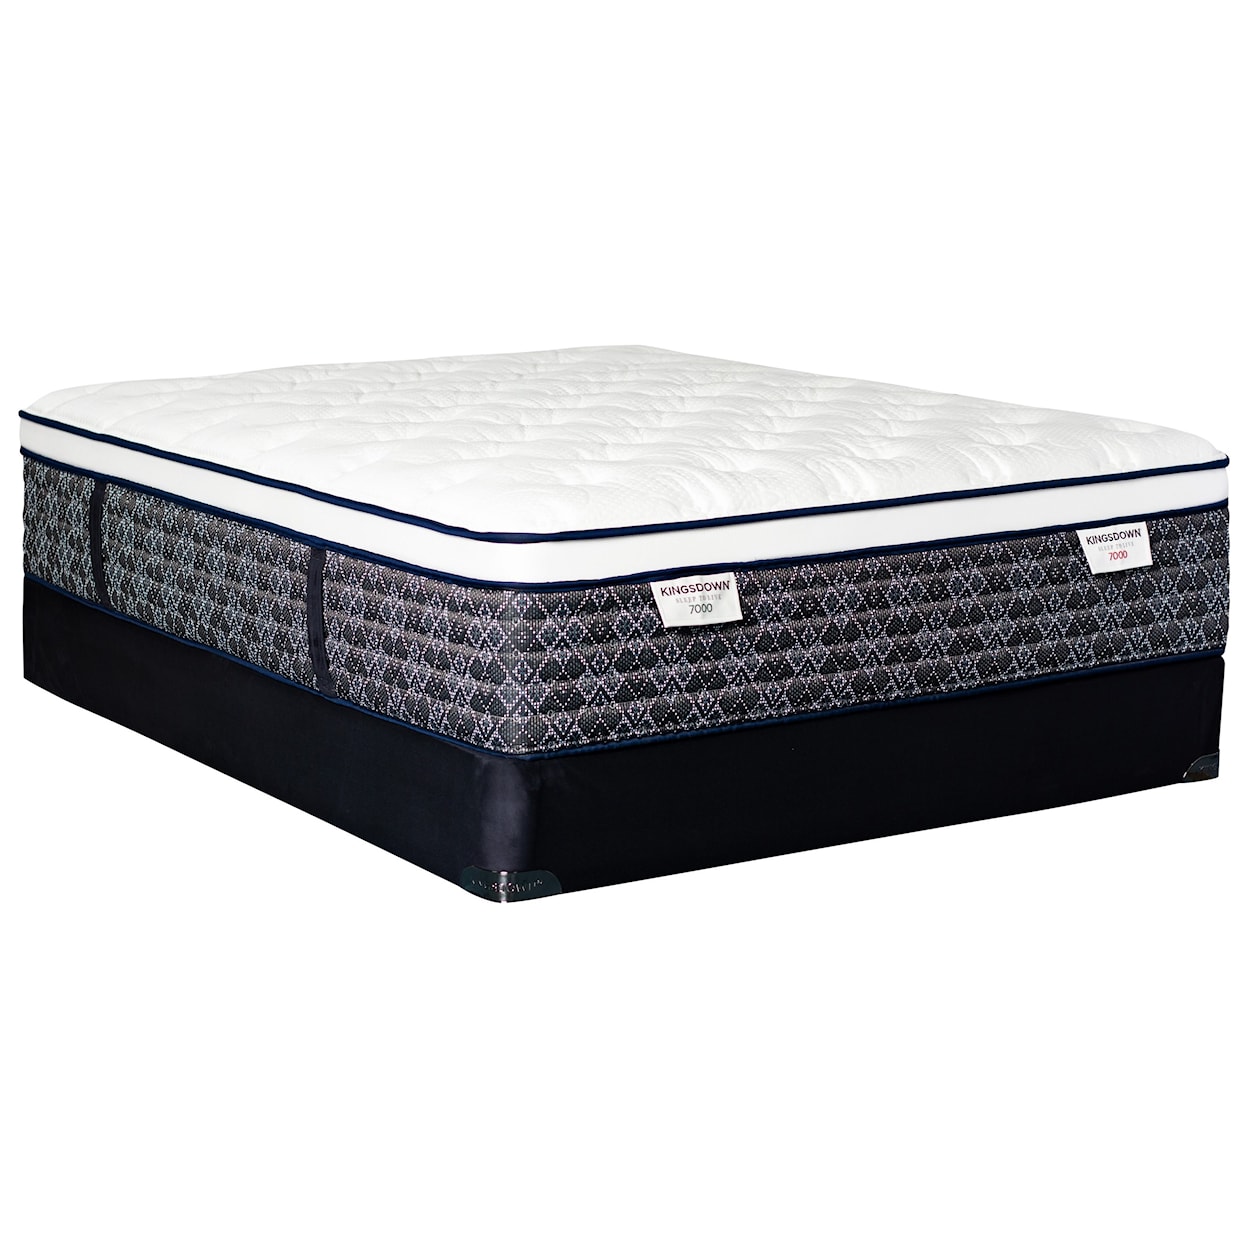 Kingsdown Sleep to Live 7000 Green Red ET Queen Pocketed Coil Mattress Set